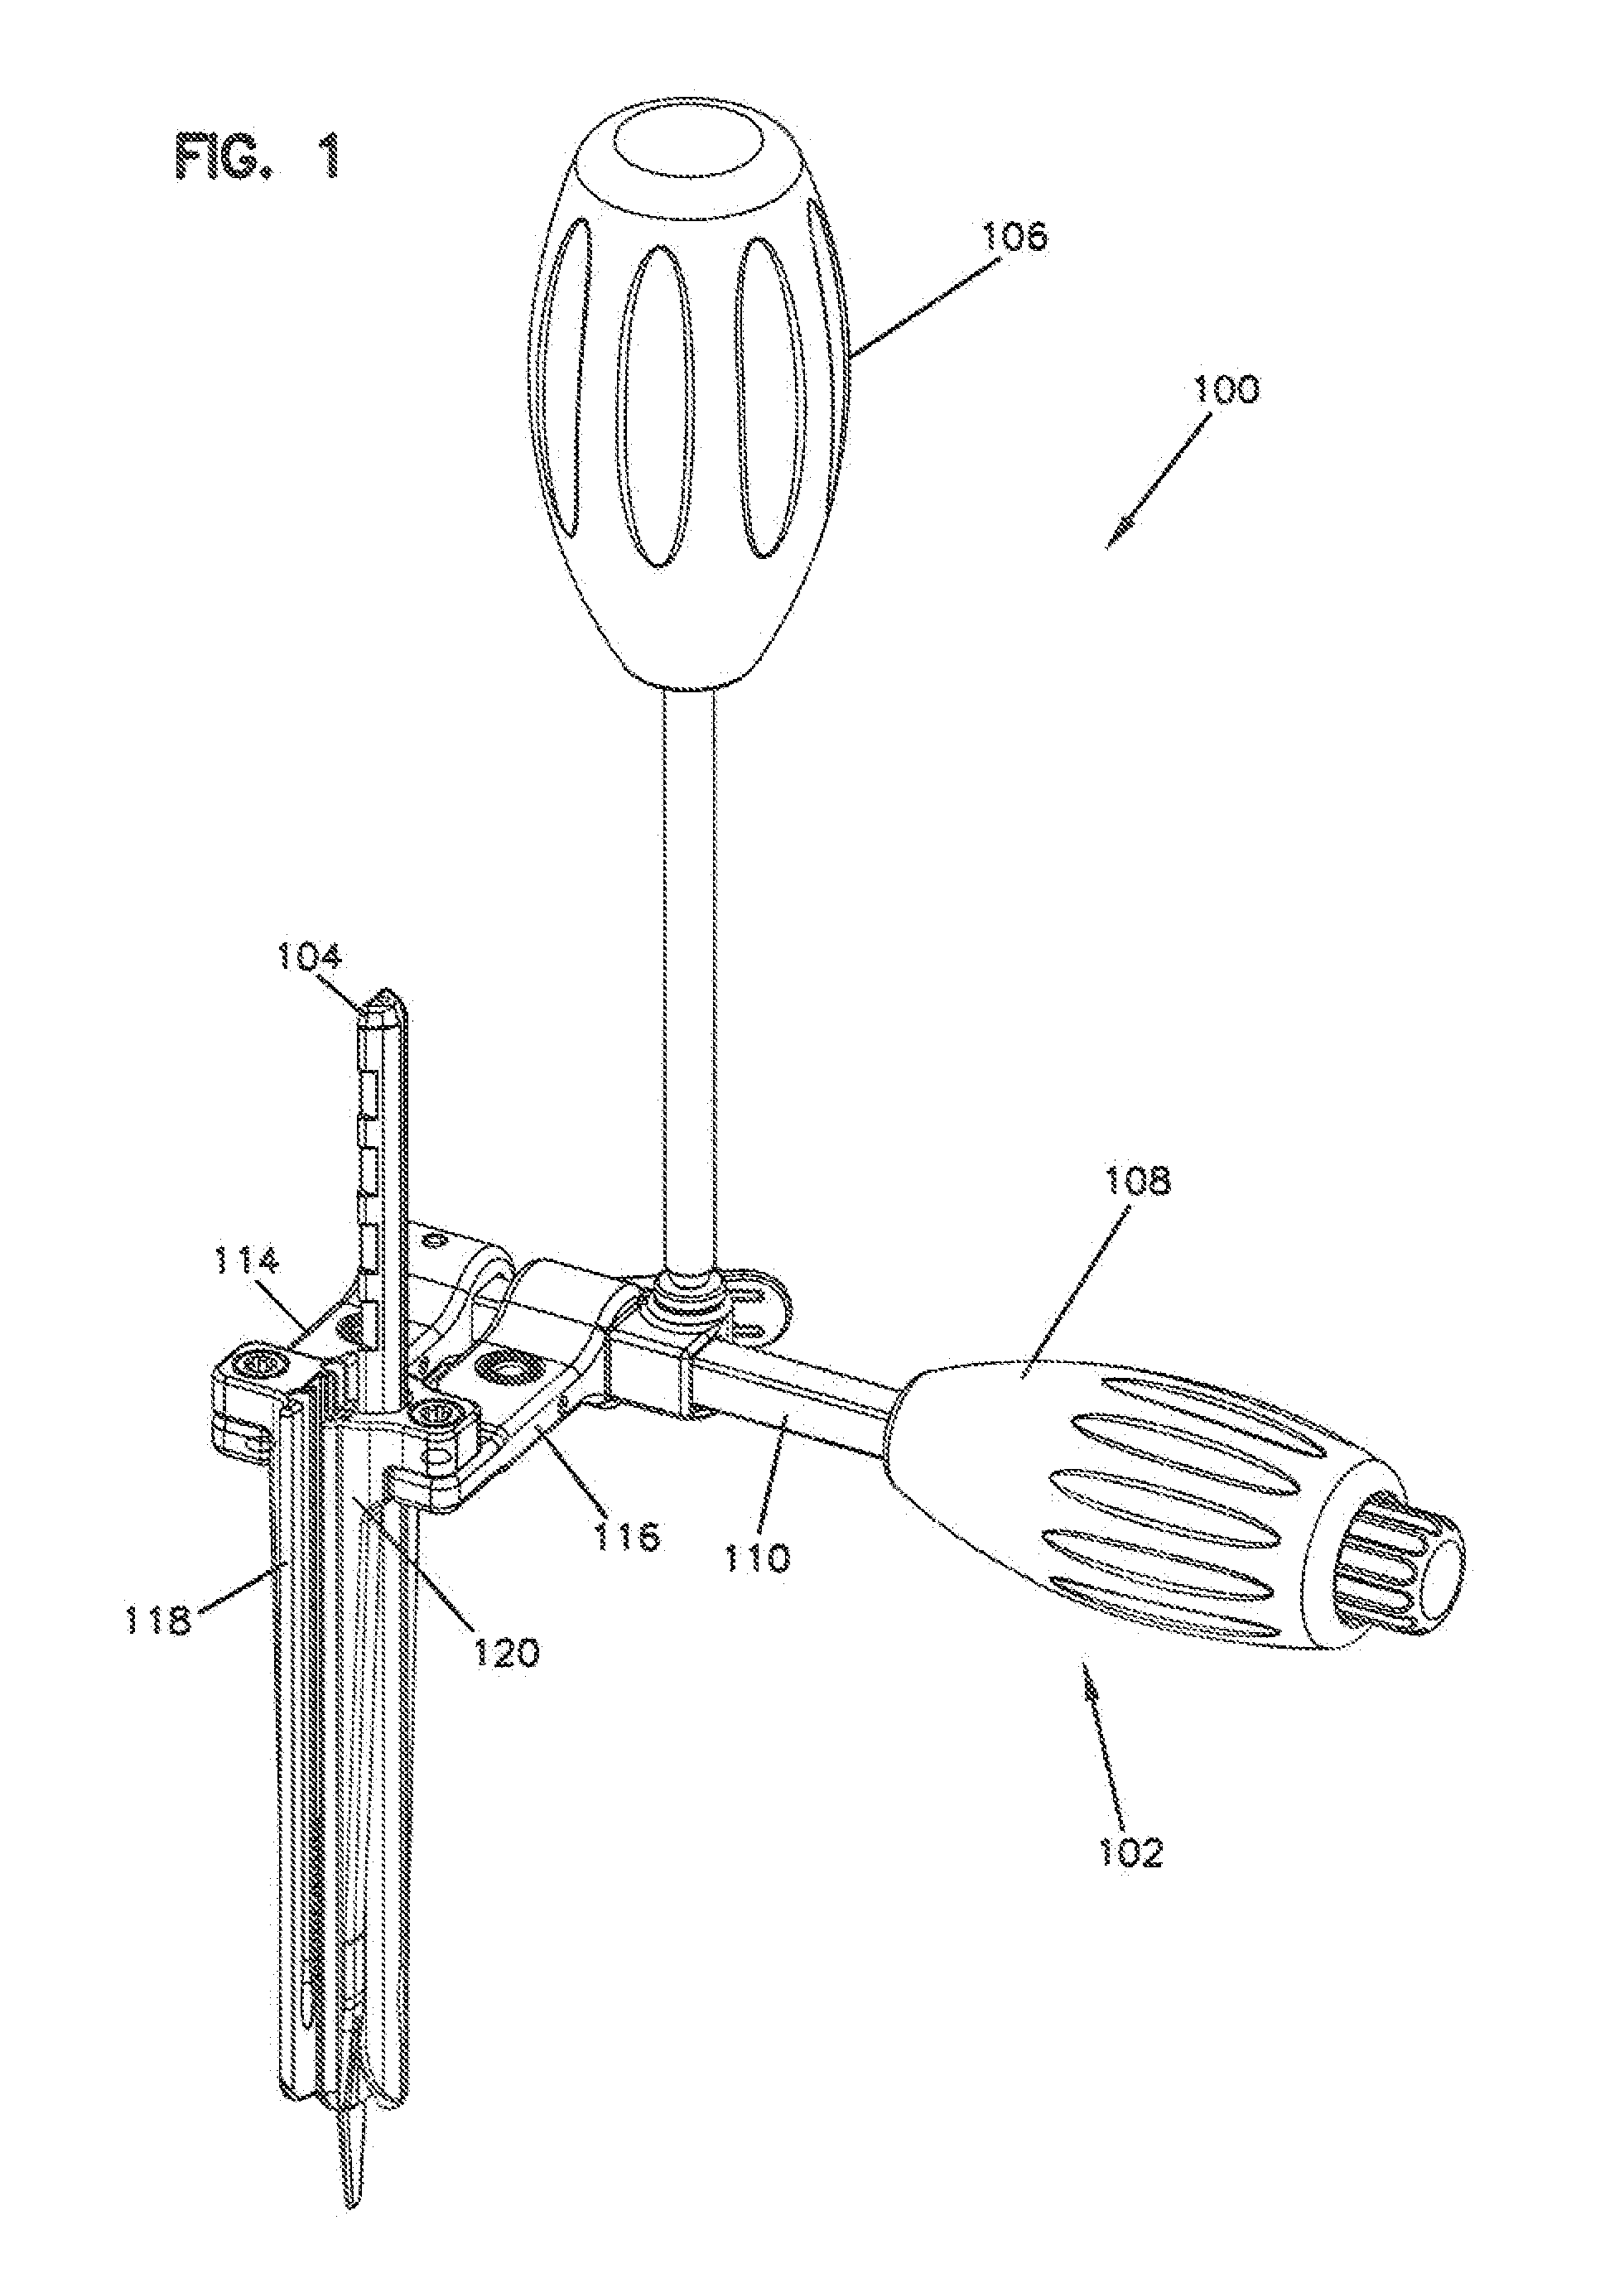 Surgical retractor system and methods of use